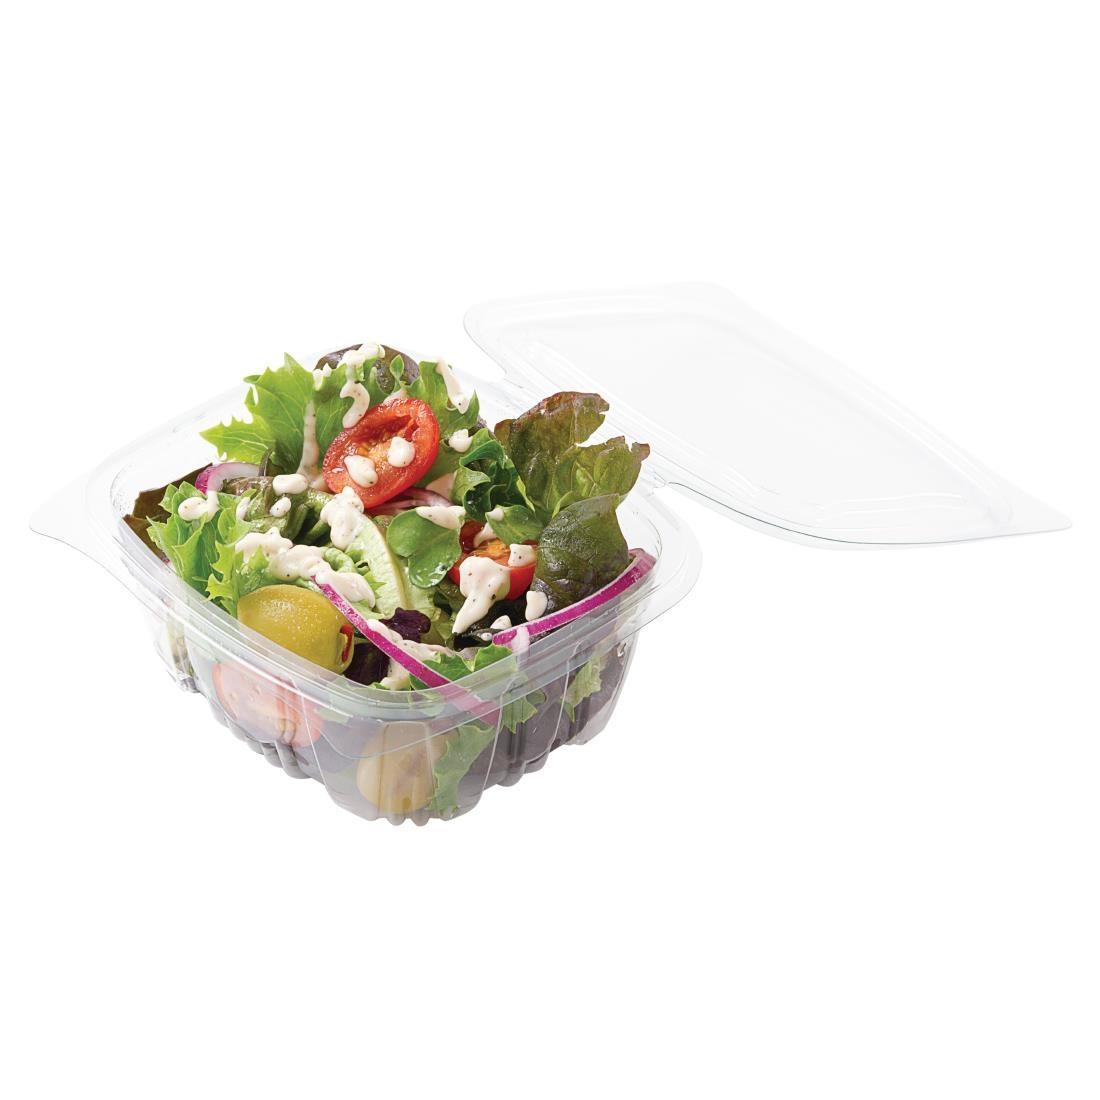 RPET Salad Containers 750ml (Pack of 500) - CF688  - 2